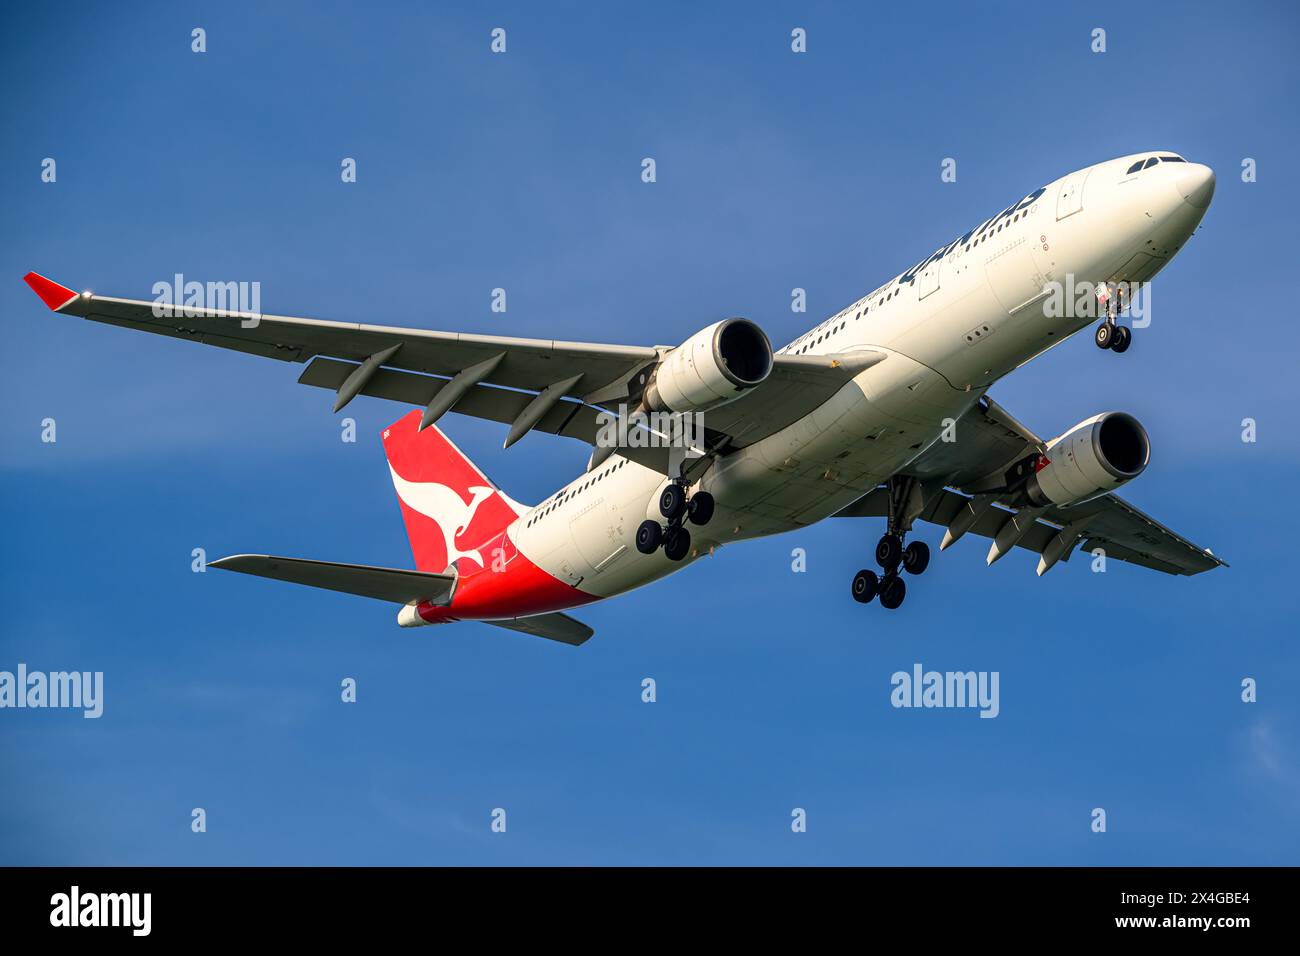 Qantas, Airbus A330-200, VH-EBR, on final approach to Singapore Changi airport Stock Photo